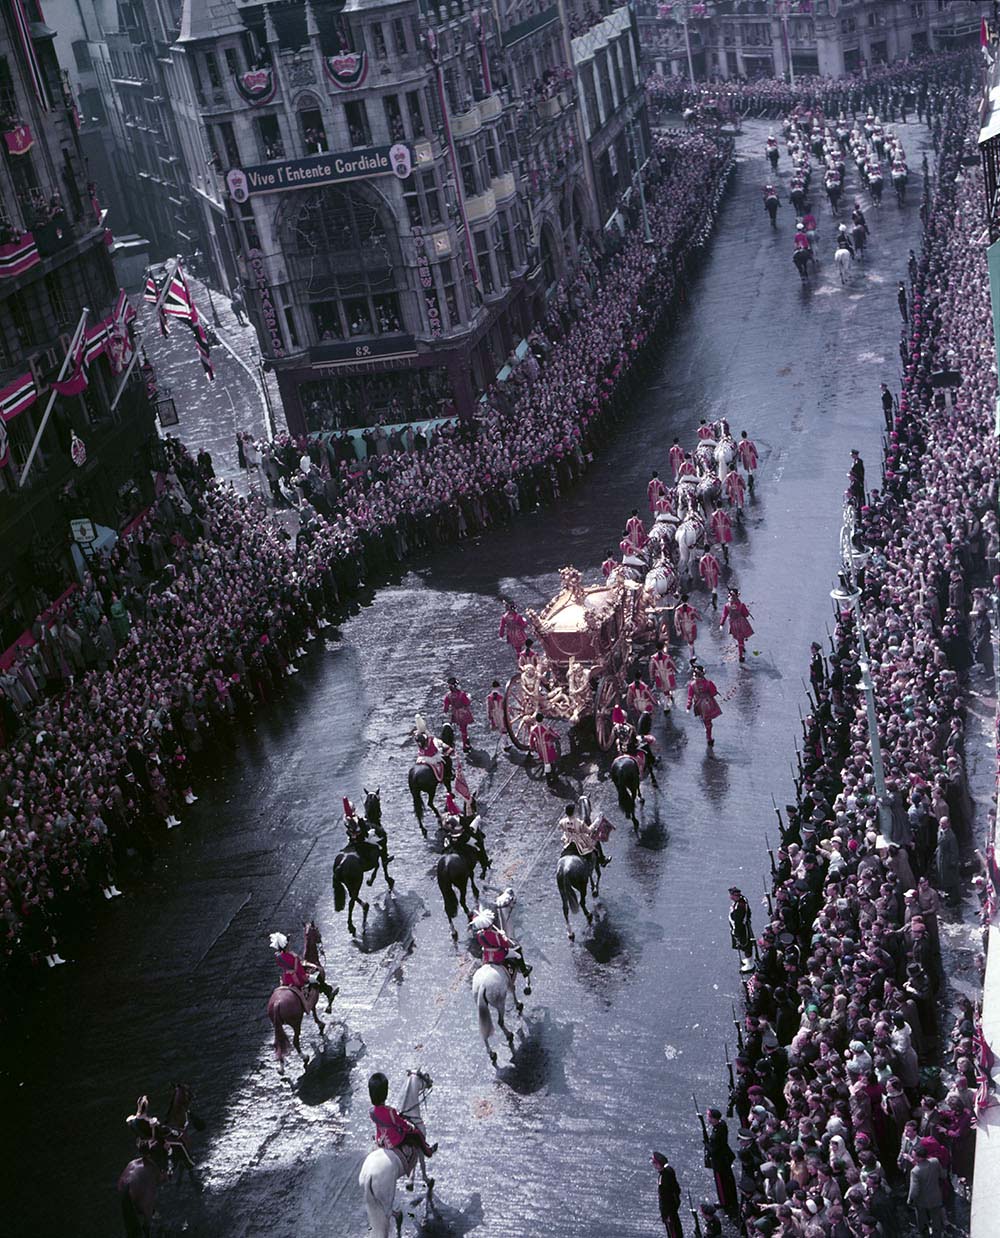 On the way to the Abbey for the Coronation. Photo credit: Library and Archives Canada.